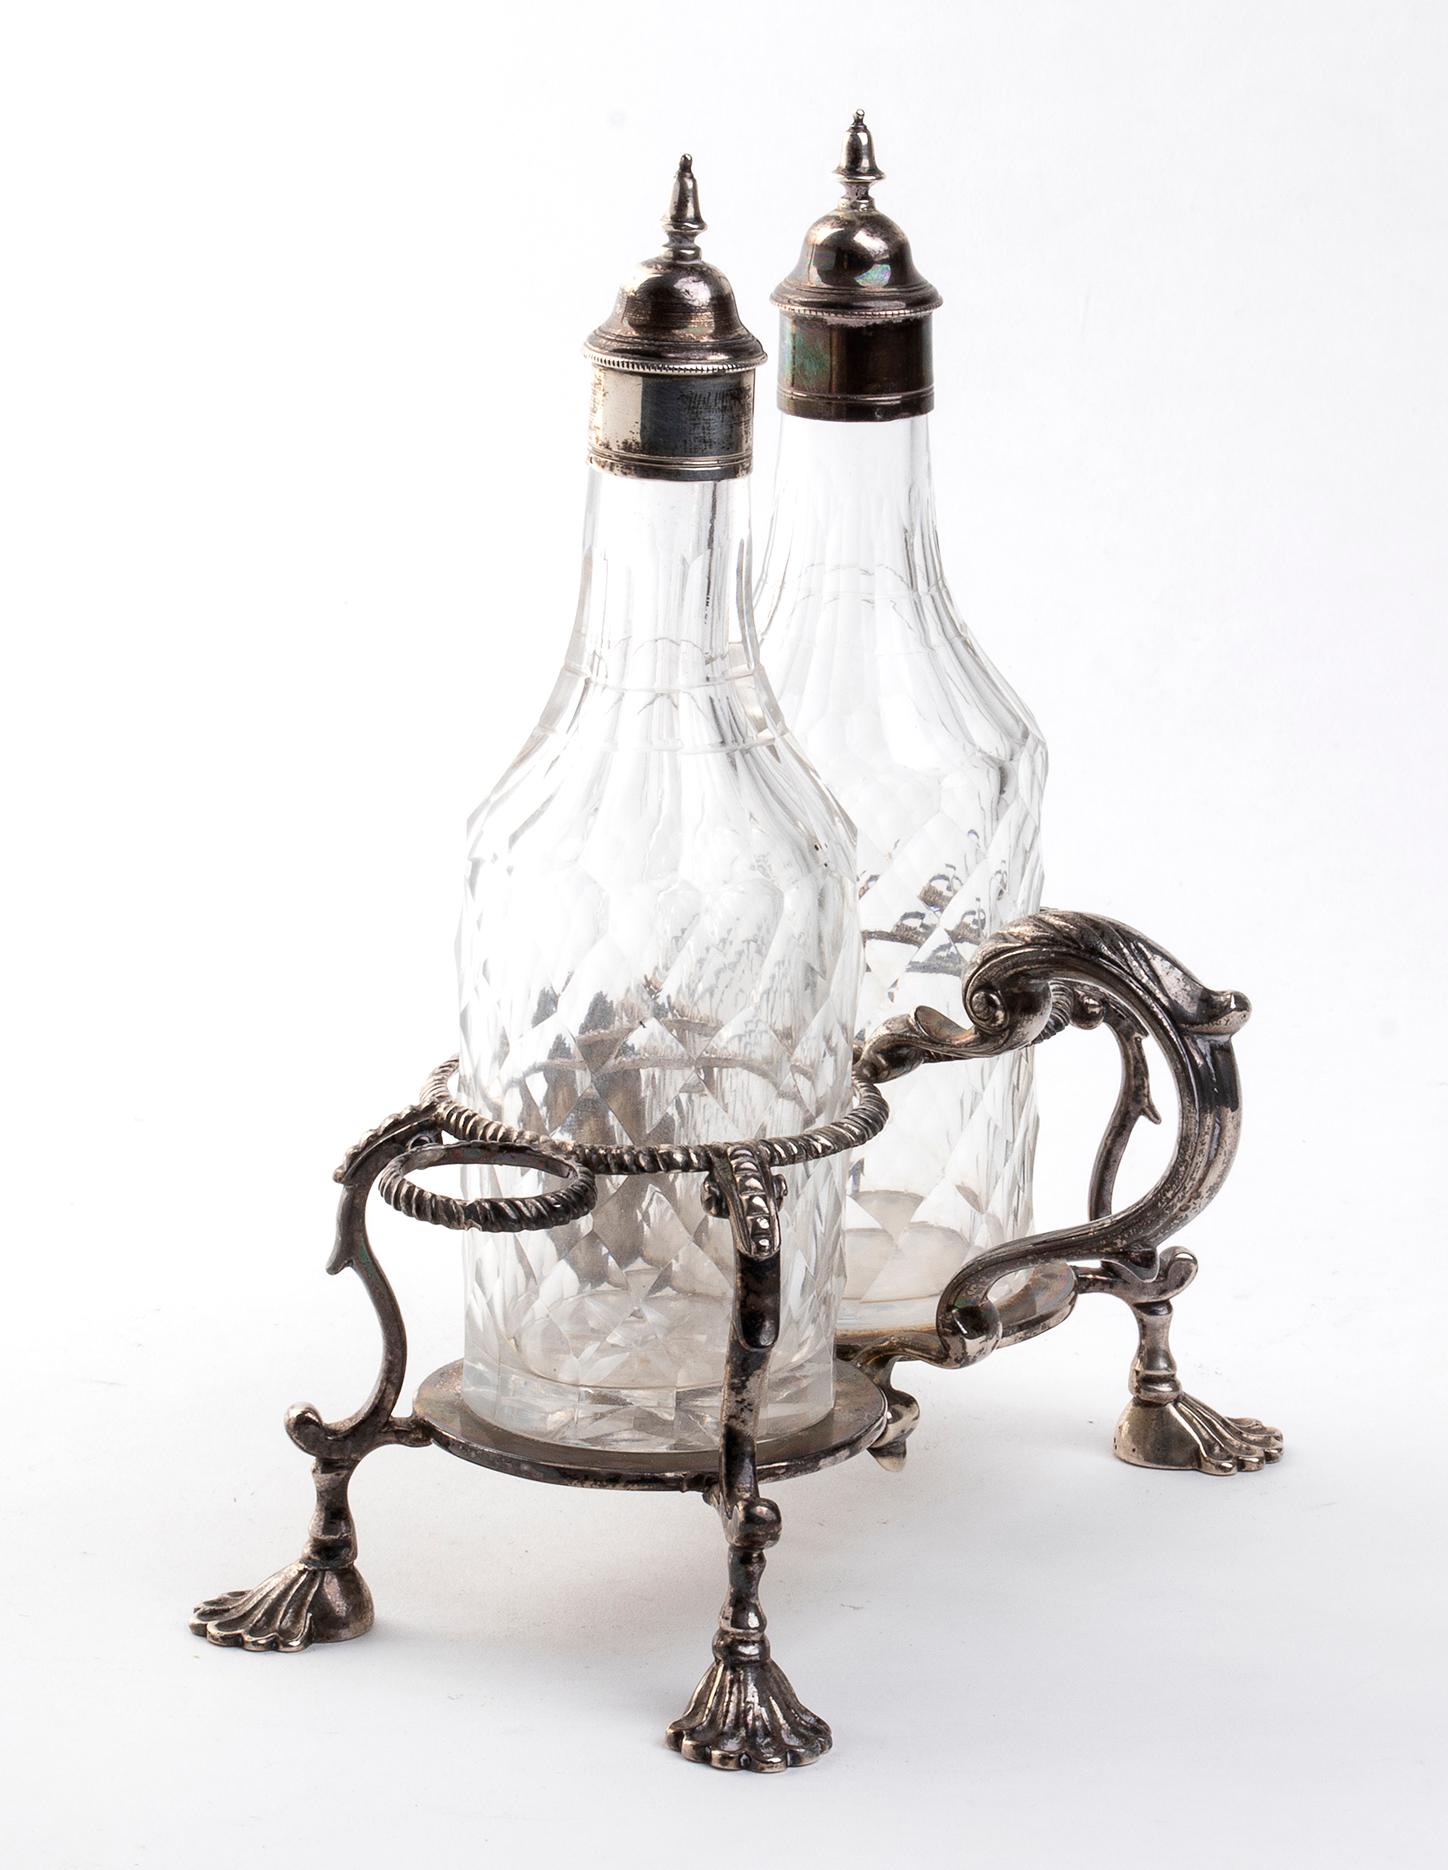 You are admiring a striking Georgian silver vinegar ampoule, realized in London in 1766.

Made of 925/1000 silver.

This elegant vinegar ampoule is formed by a decorated stand resting on four seashell feet containing two ground glass